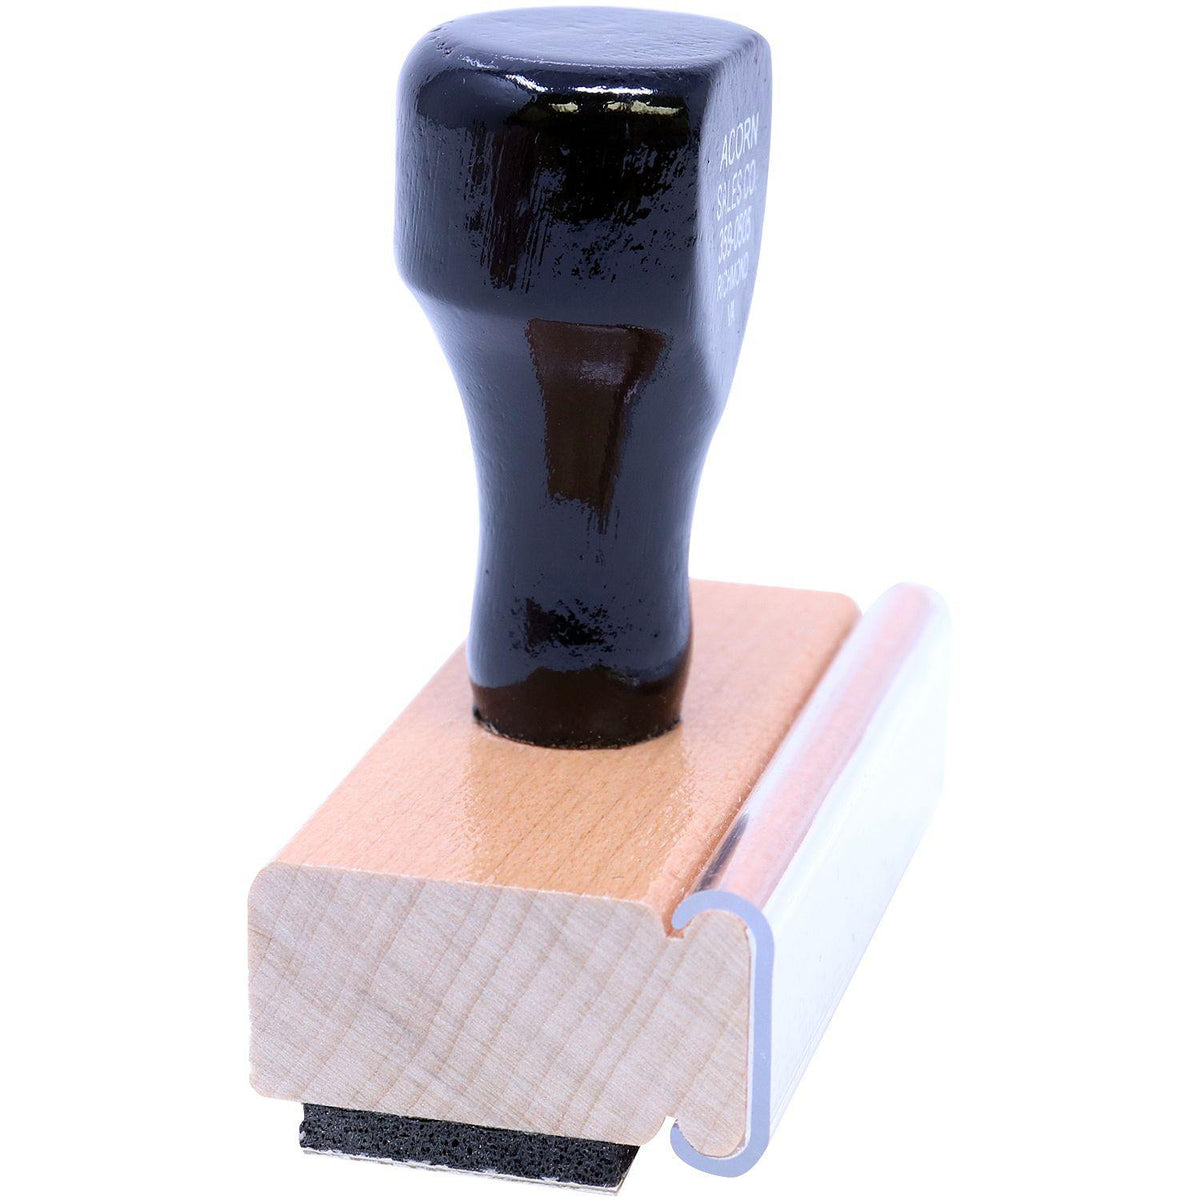 Parcel Post Air Rubber Stamp - Engineer Seal Stamps - Brand_Acorn, Impression Size_Small, Stamp Type_Regular Stamp, Type of Use_Postal &amp; Mailing, Type of Use_Shipping &amp; Receiving